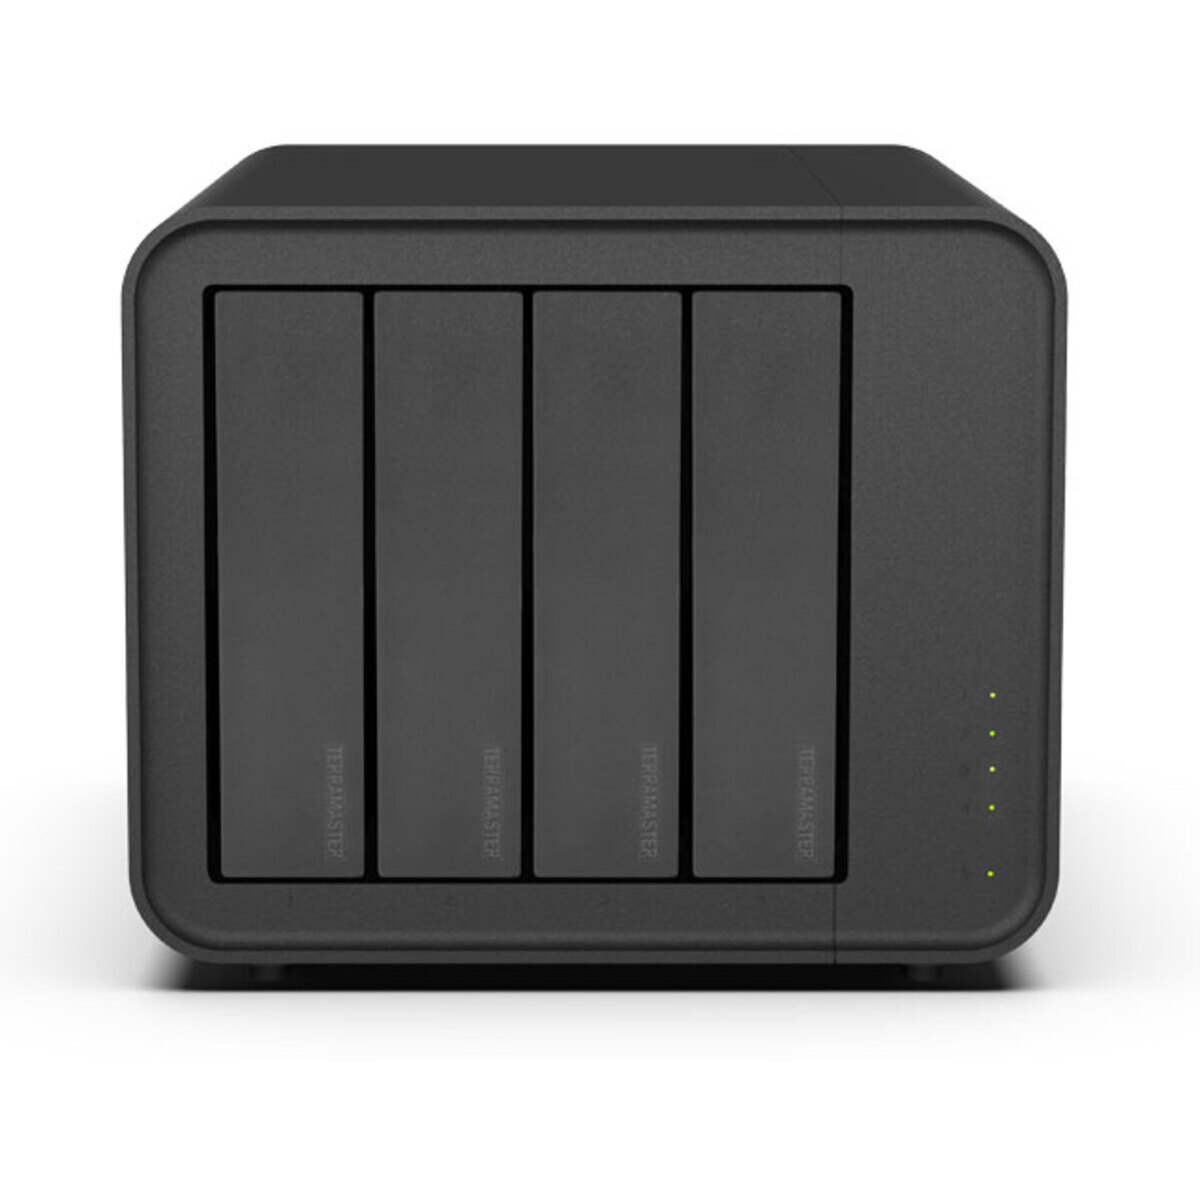 TerraMaster F4-212 24tb 4-Bay Desktop Personal / Basic Home / Small Office NAS - Network Attached Storage Device 3x8tb Samsung 870 QVO MZ-77Q8T0 2.5 560/530MB/s SATA 6Gb/s SSD CONSUMER Class Drives Installed - Burn-In Tested F4-212